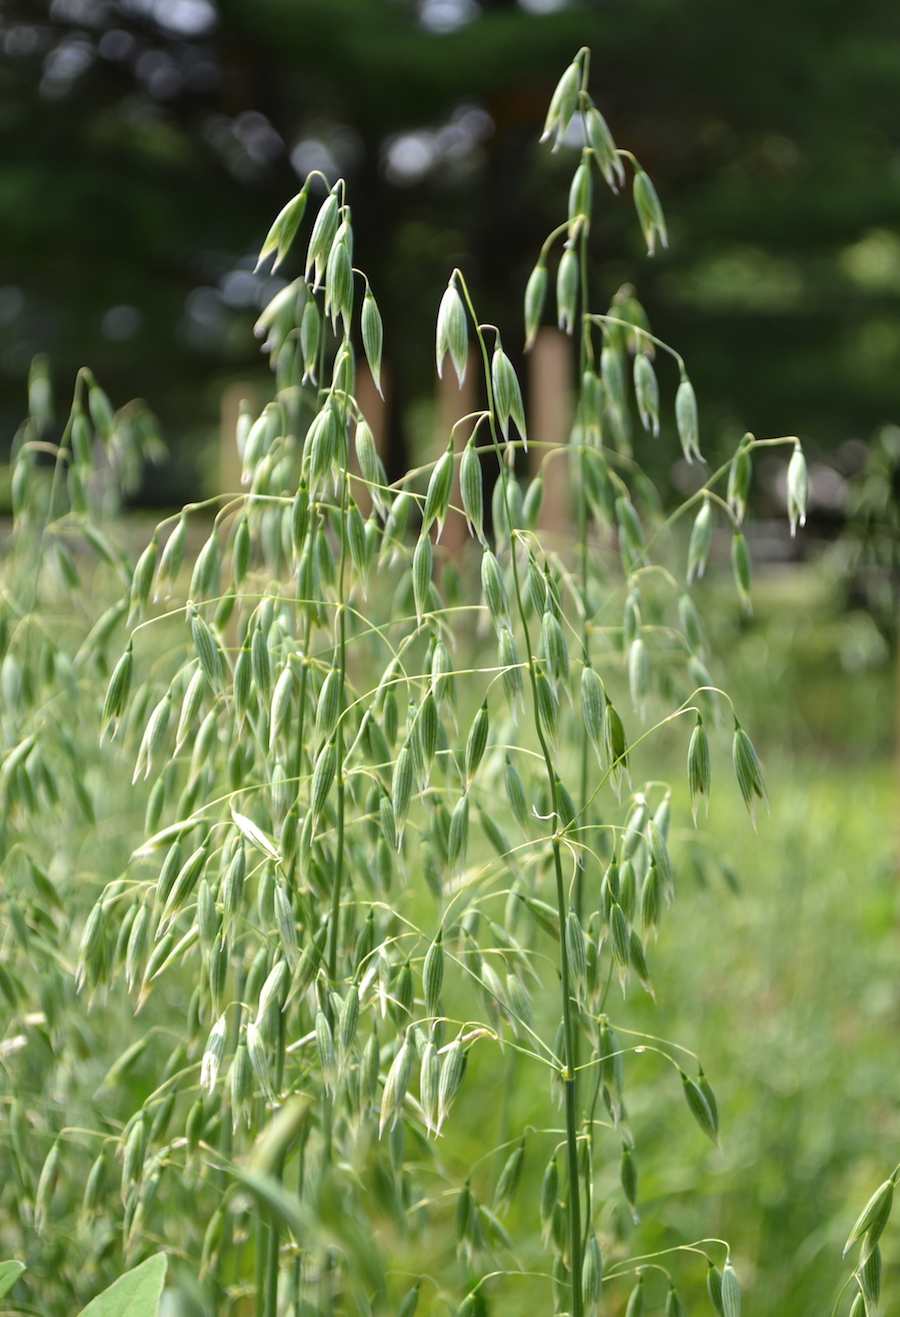 Oat (Avena sativa) growing in the wild can be helpful for supporting work-life balance